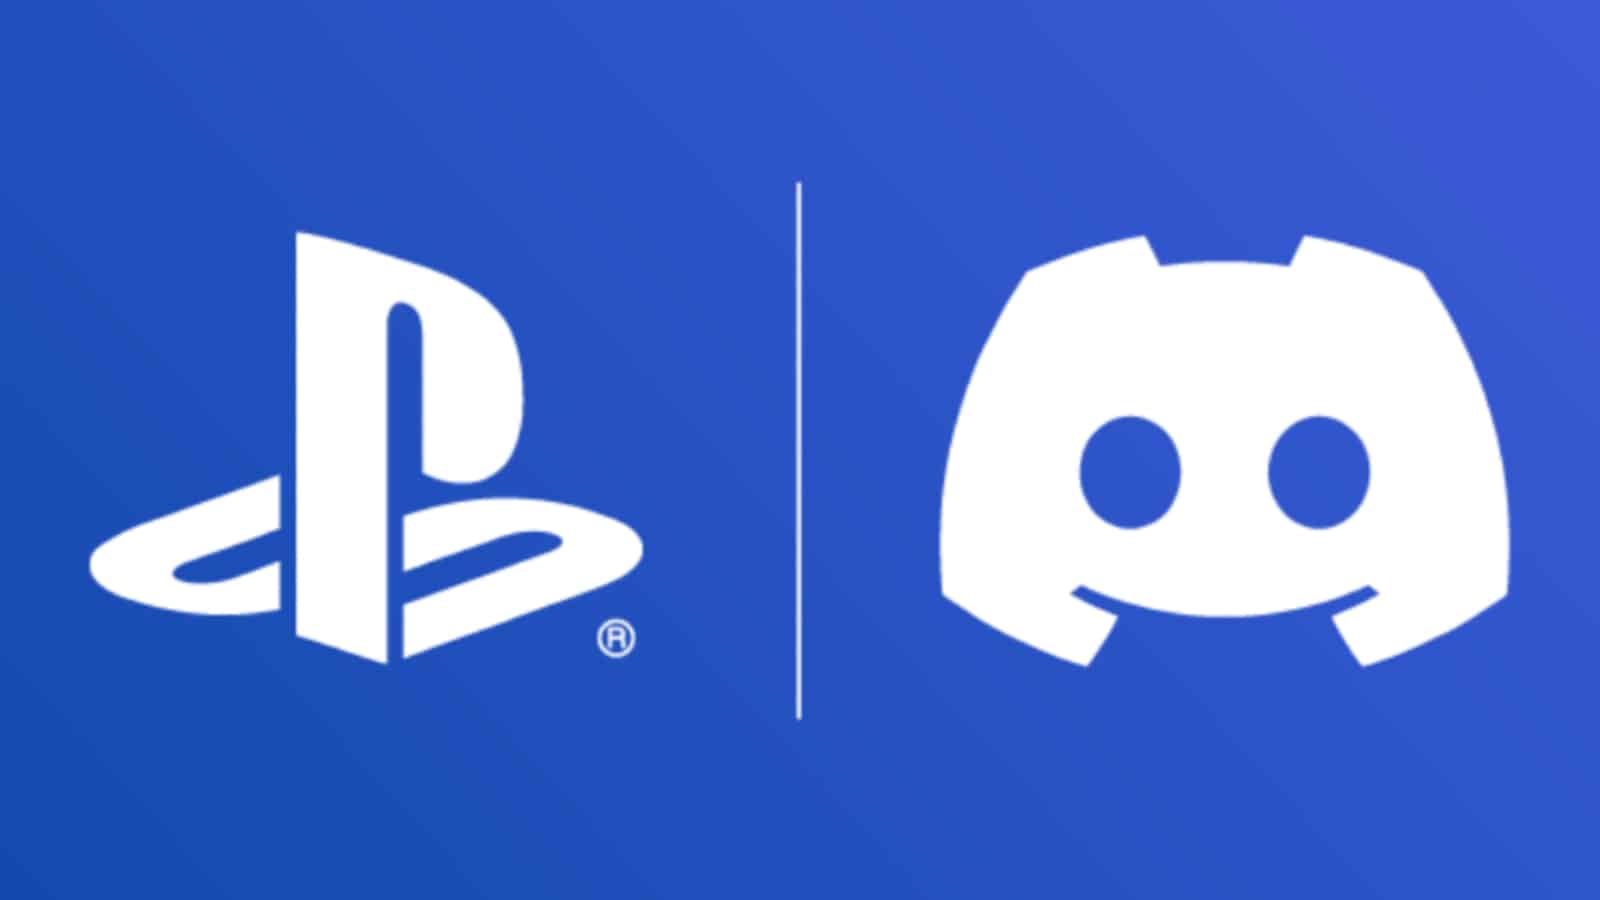 An image of the PlayStation and Discord logos on a blue background